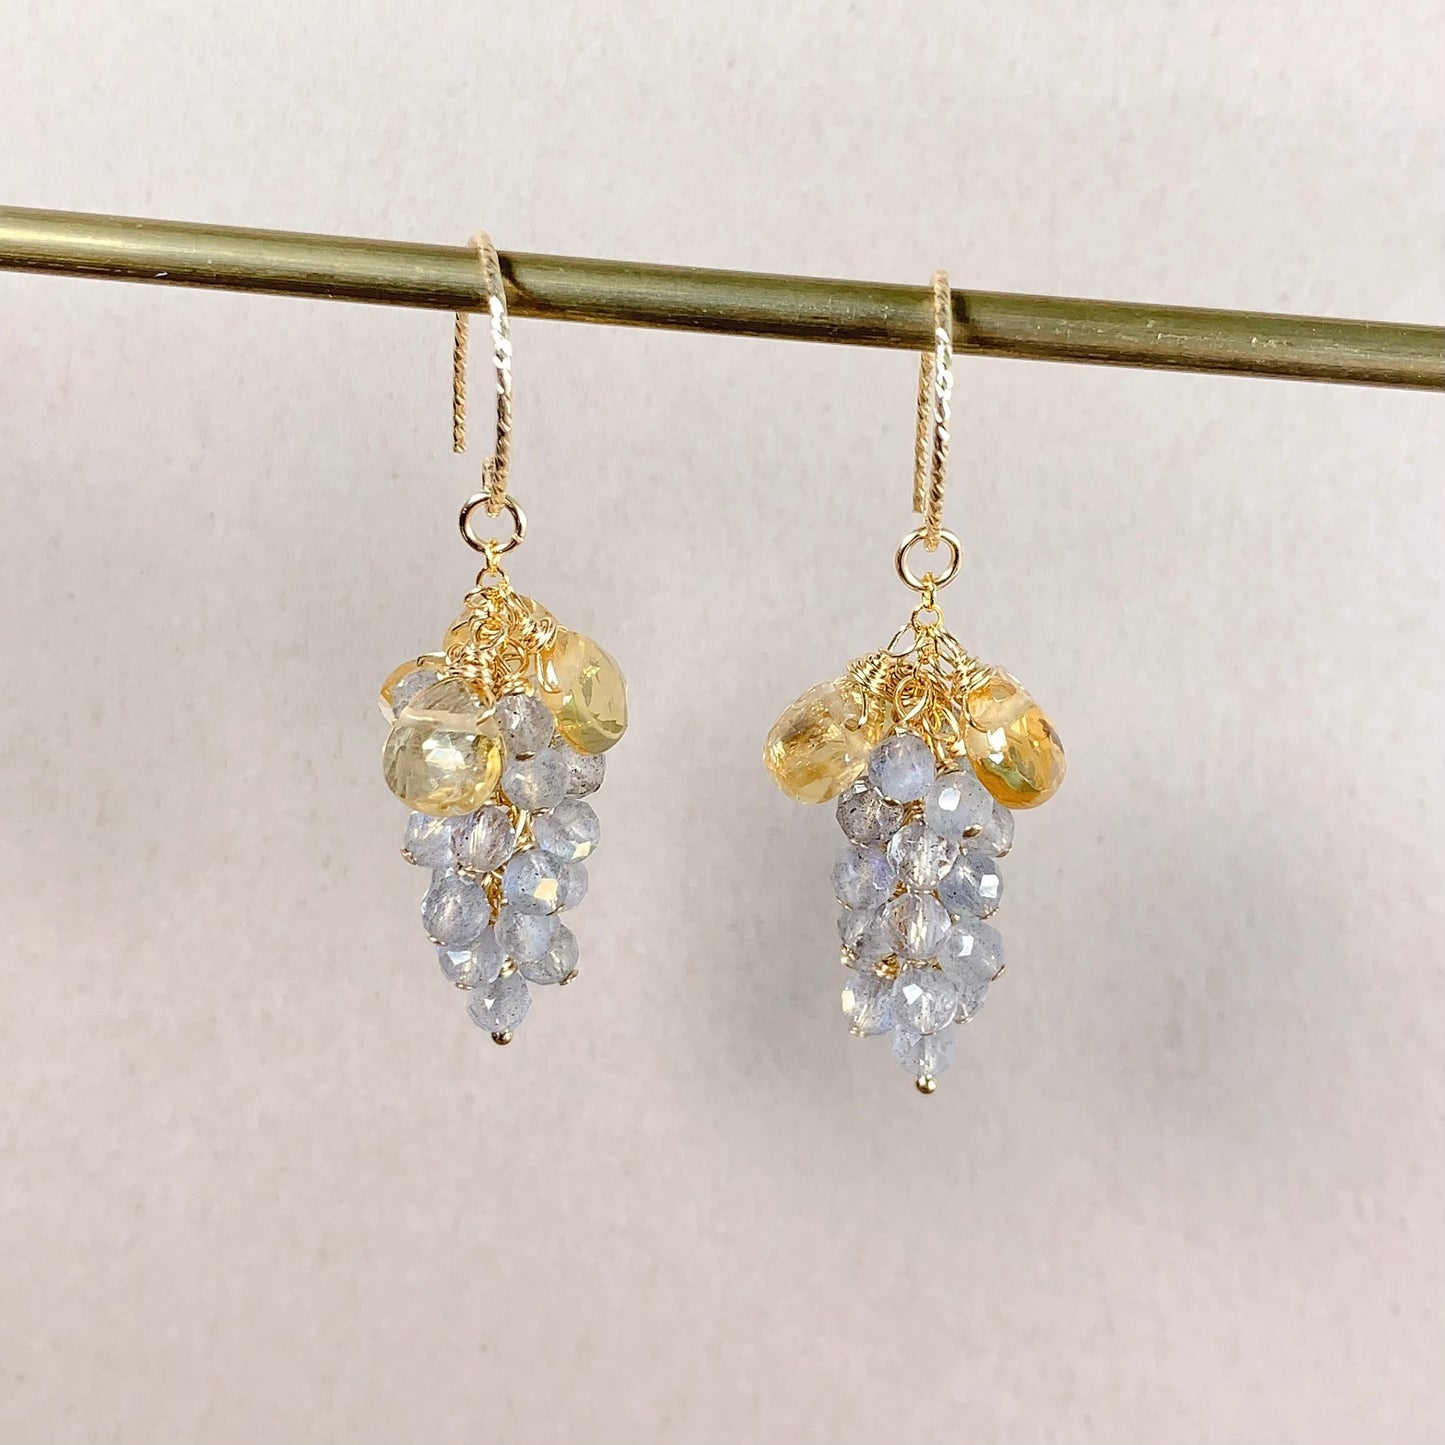 Labradorite with Citrine Cluster Earrings